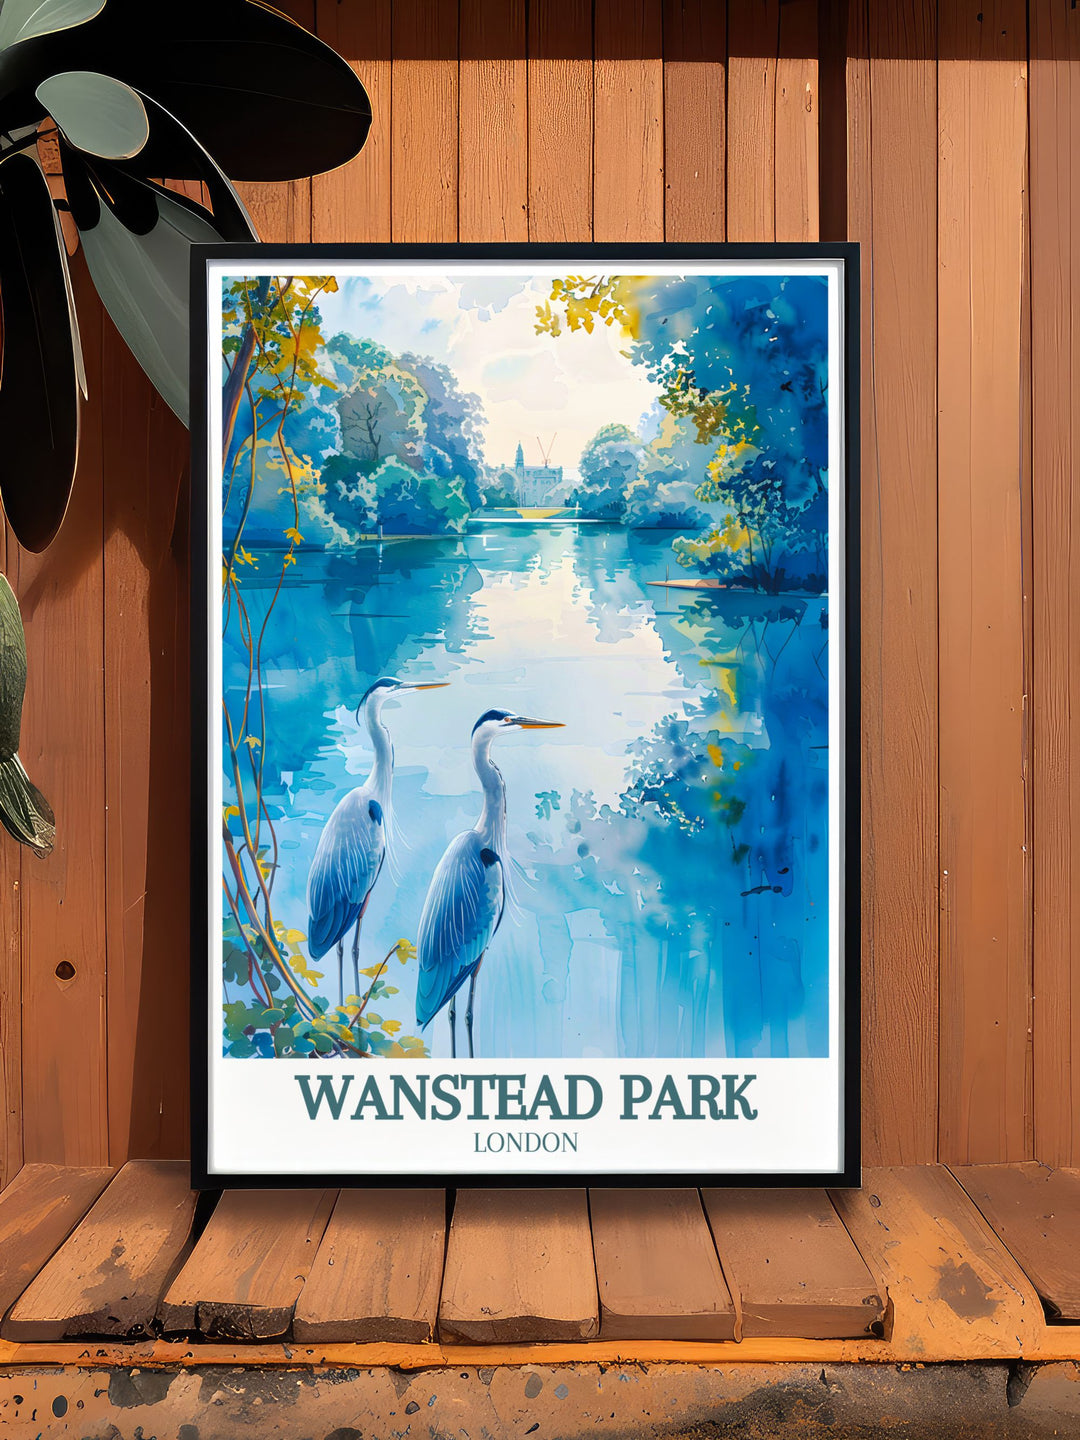 Captivating Wanstead Park poster featuring the vibrant flora and fauna of this iconic East London location. This print is perfect for nature wall art enthusiasts who appreciate the beauty and charm of Londons parks and green spaces